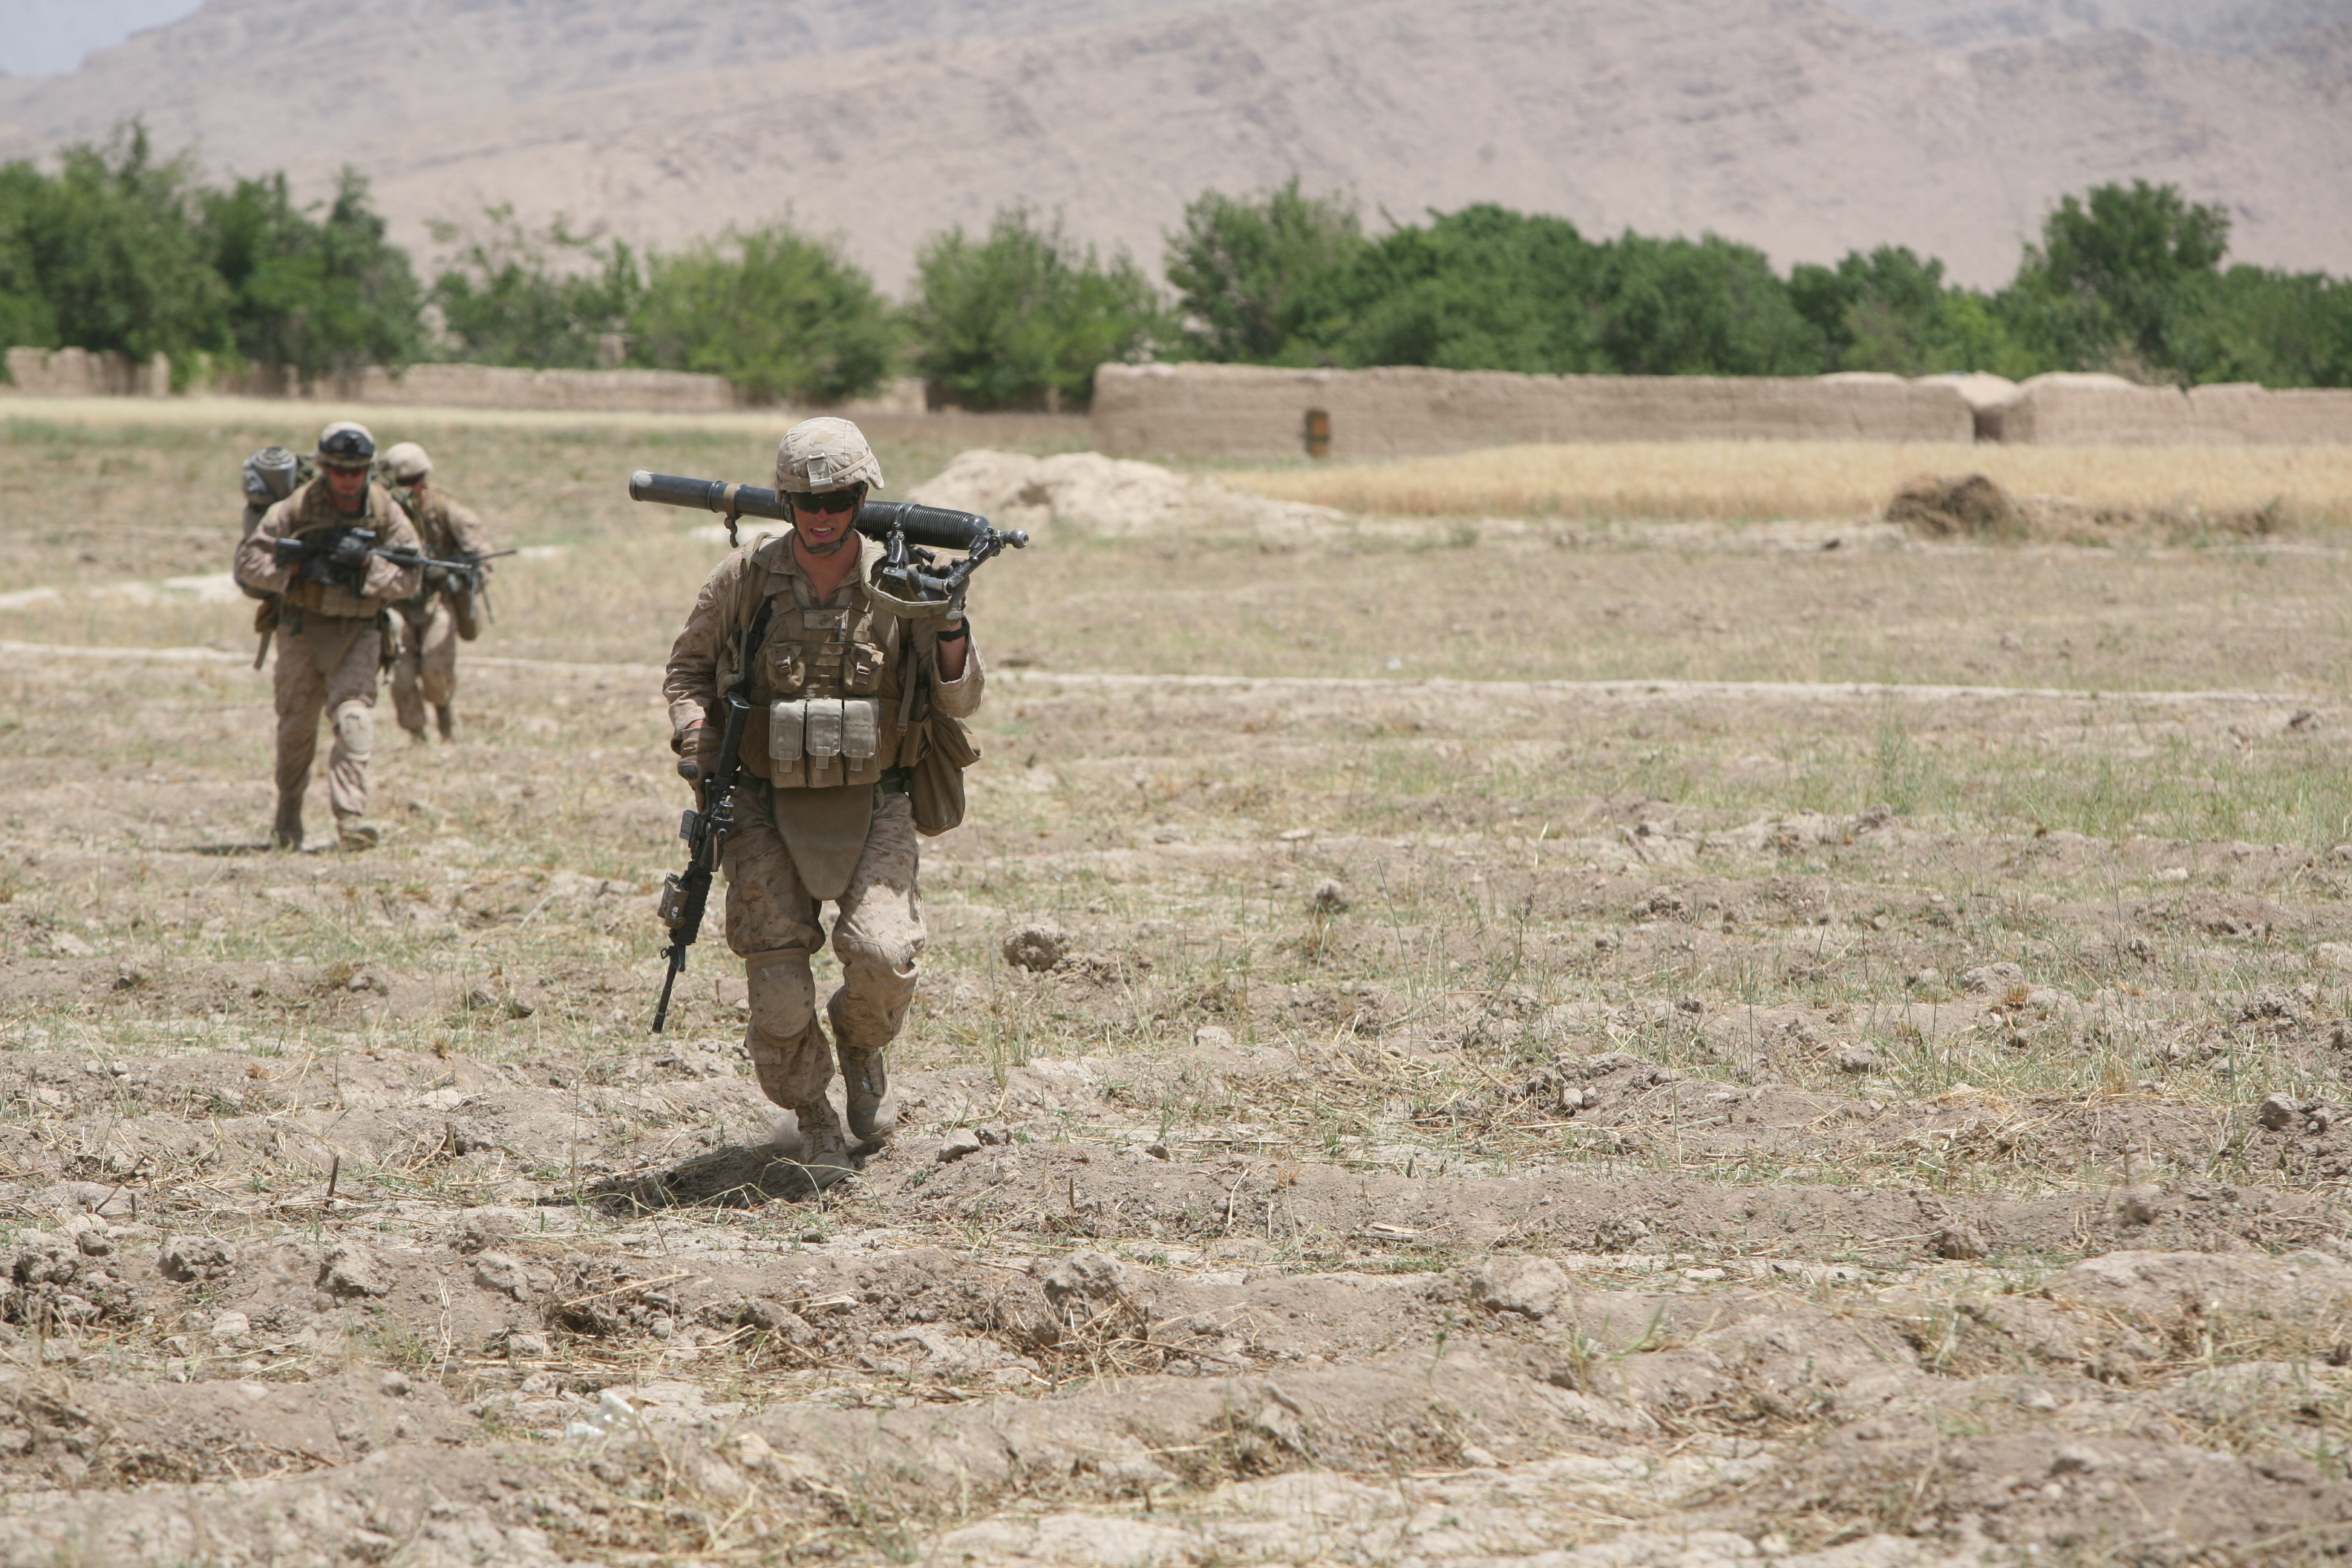 U.S. Marine Corps Lance Cpl. John R. Silvernail, front, with Golf Company, 2nd Battalion, 5th Marine Regiment, Regimental Combat Team 6 carries an M224 60 mm Lightweight Mortar as he runs for cover through an open field in Zamindawar, Helmand province, Afghanistan, May 28, 2012. Marines took enemy contact while they were conducting a patrol in the local area. (U.S. Marine Corps photo by Cpl. Christopher M. Paulton).